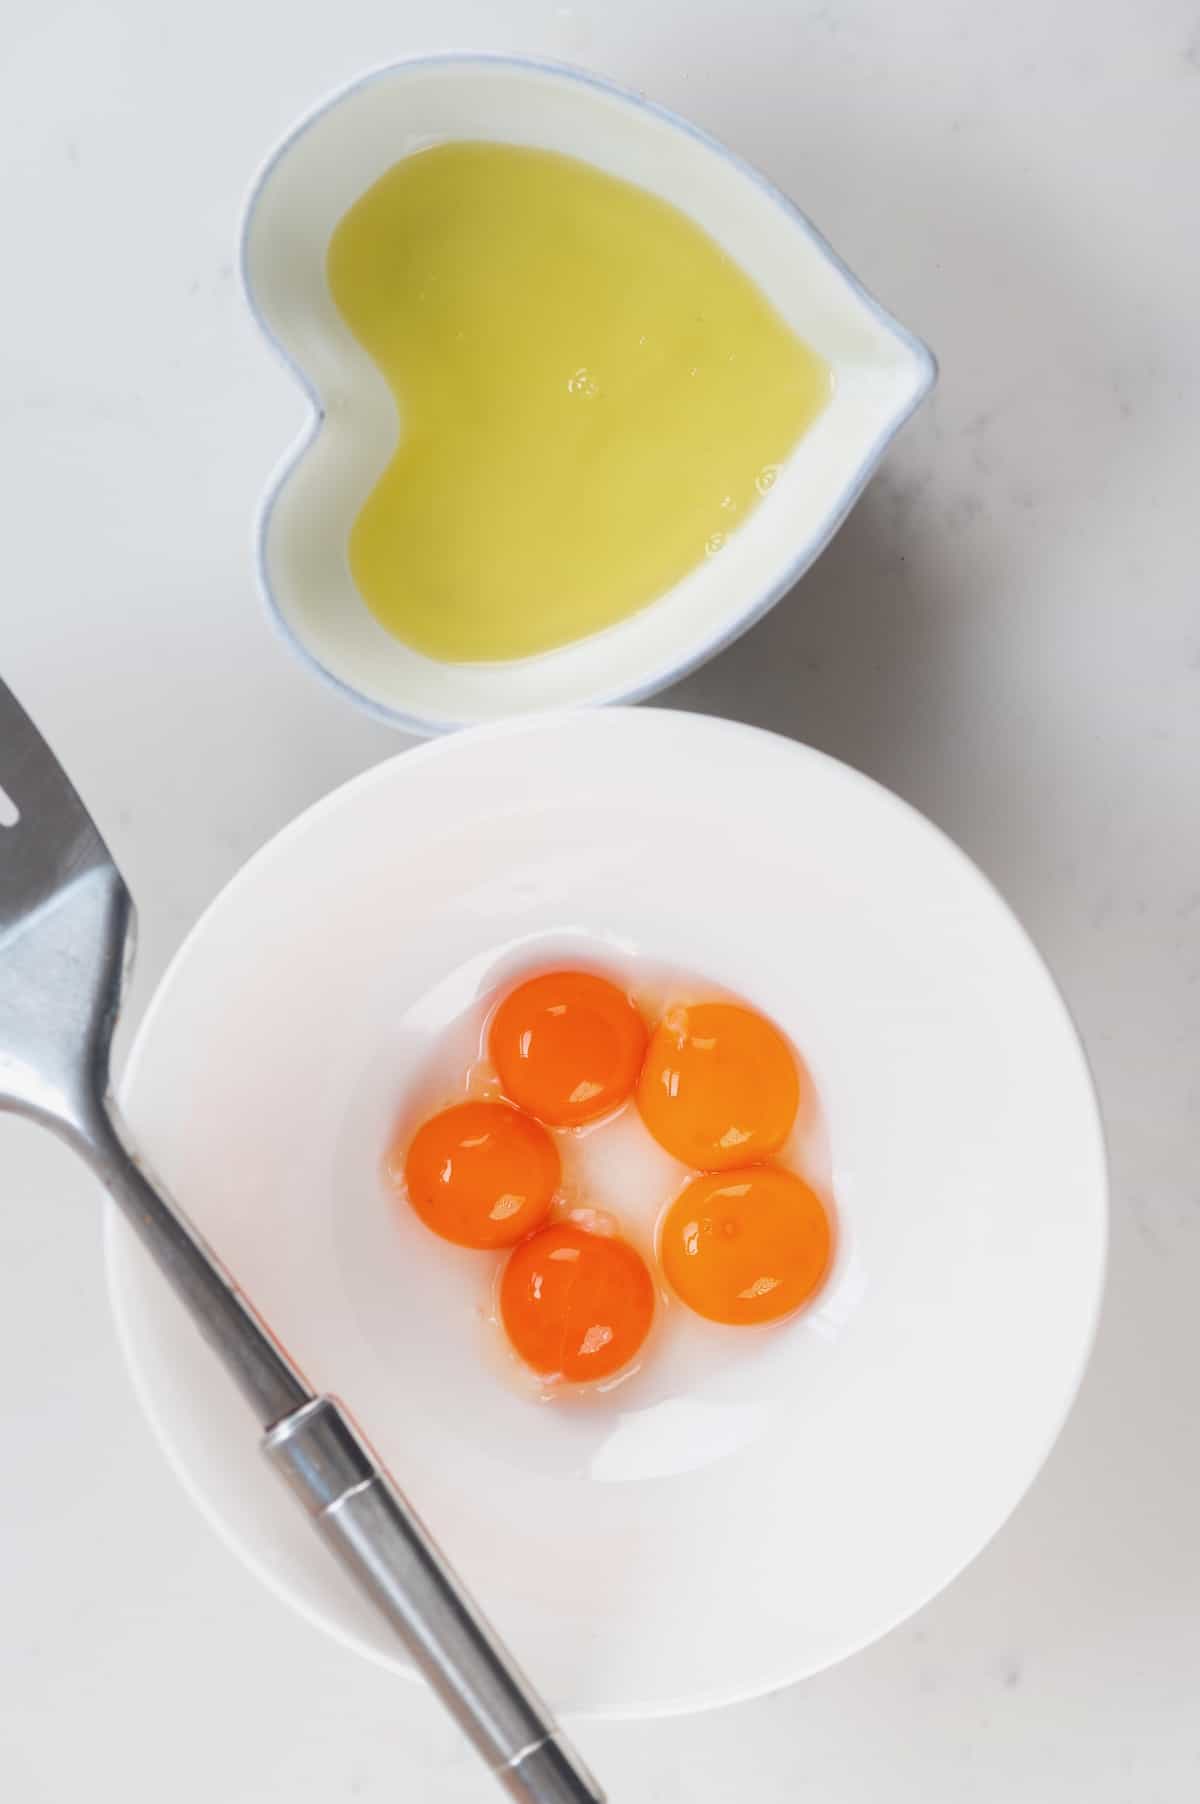 how to separate egg whites and yolks use slotted spoon. one bowl with whites and one with yolks. 